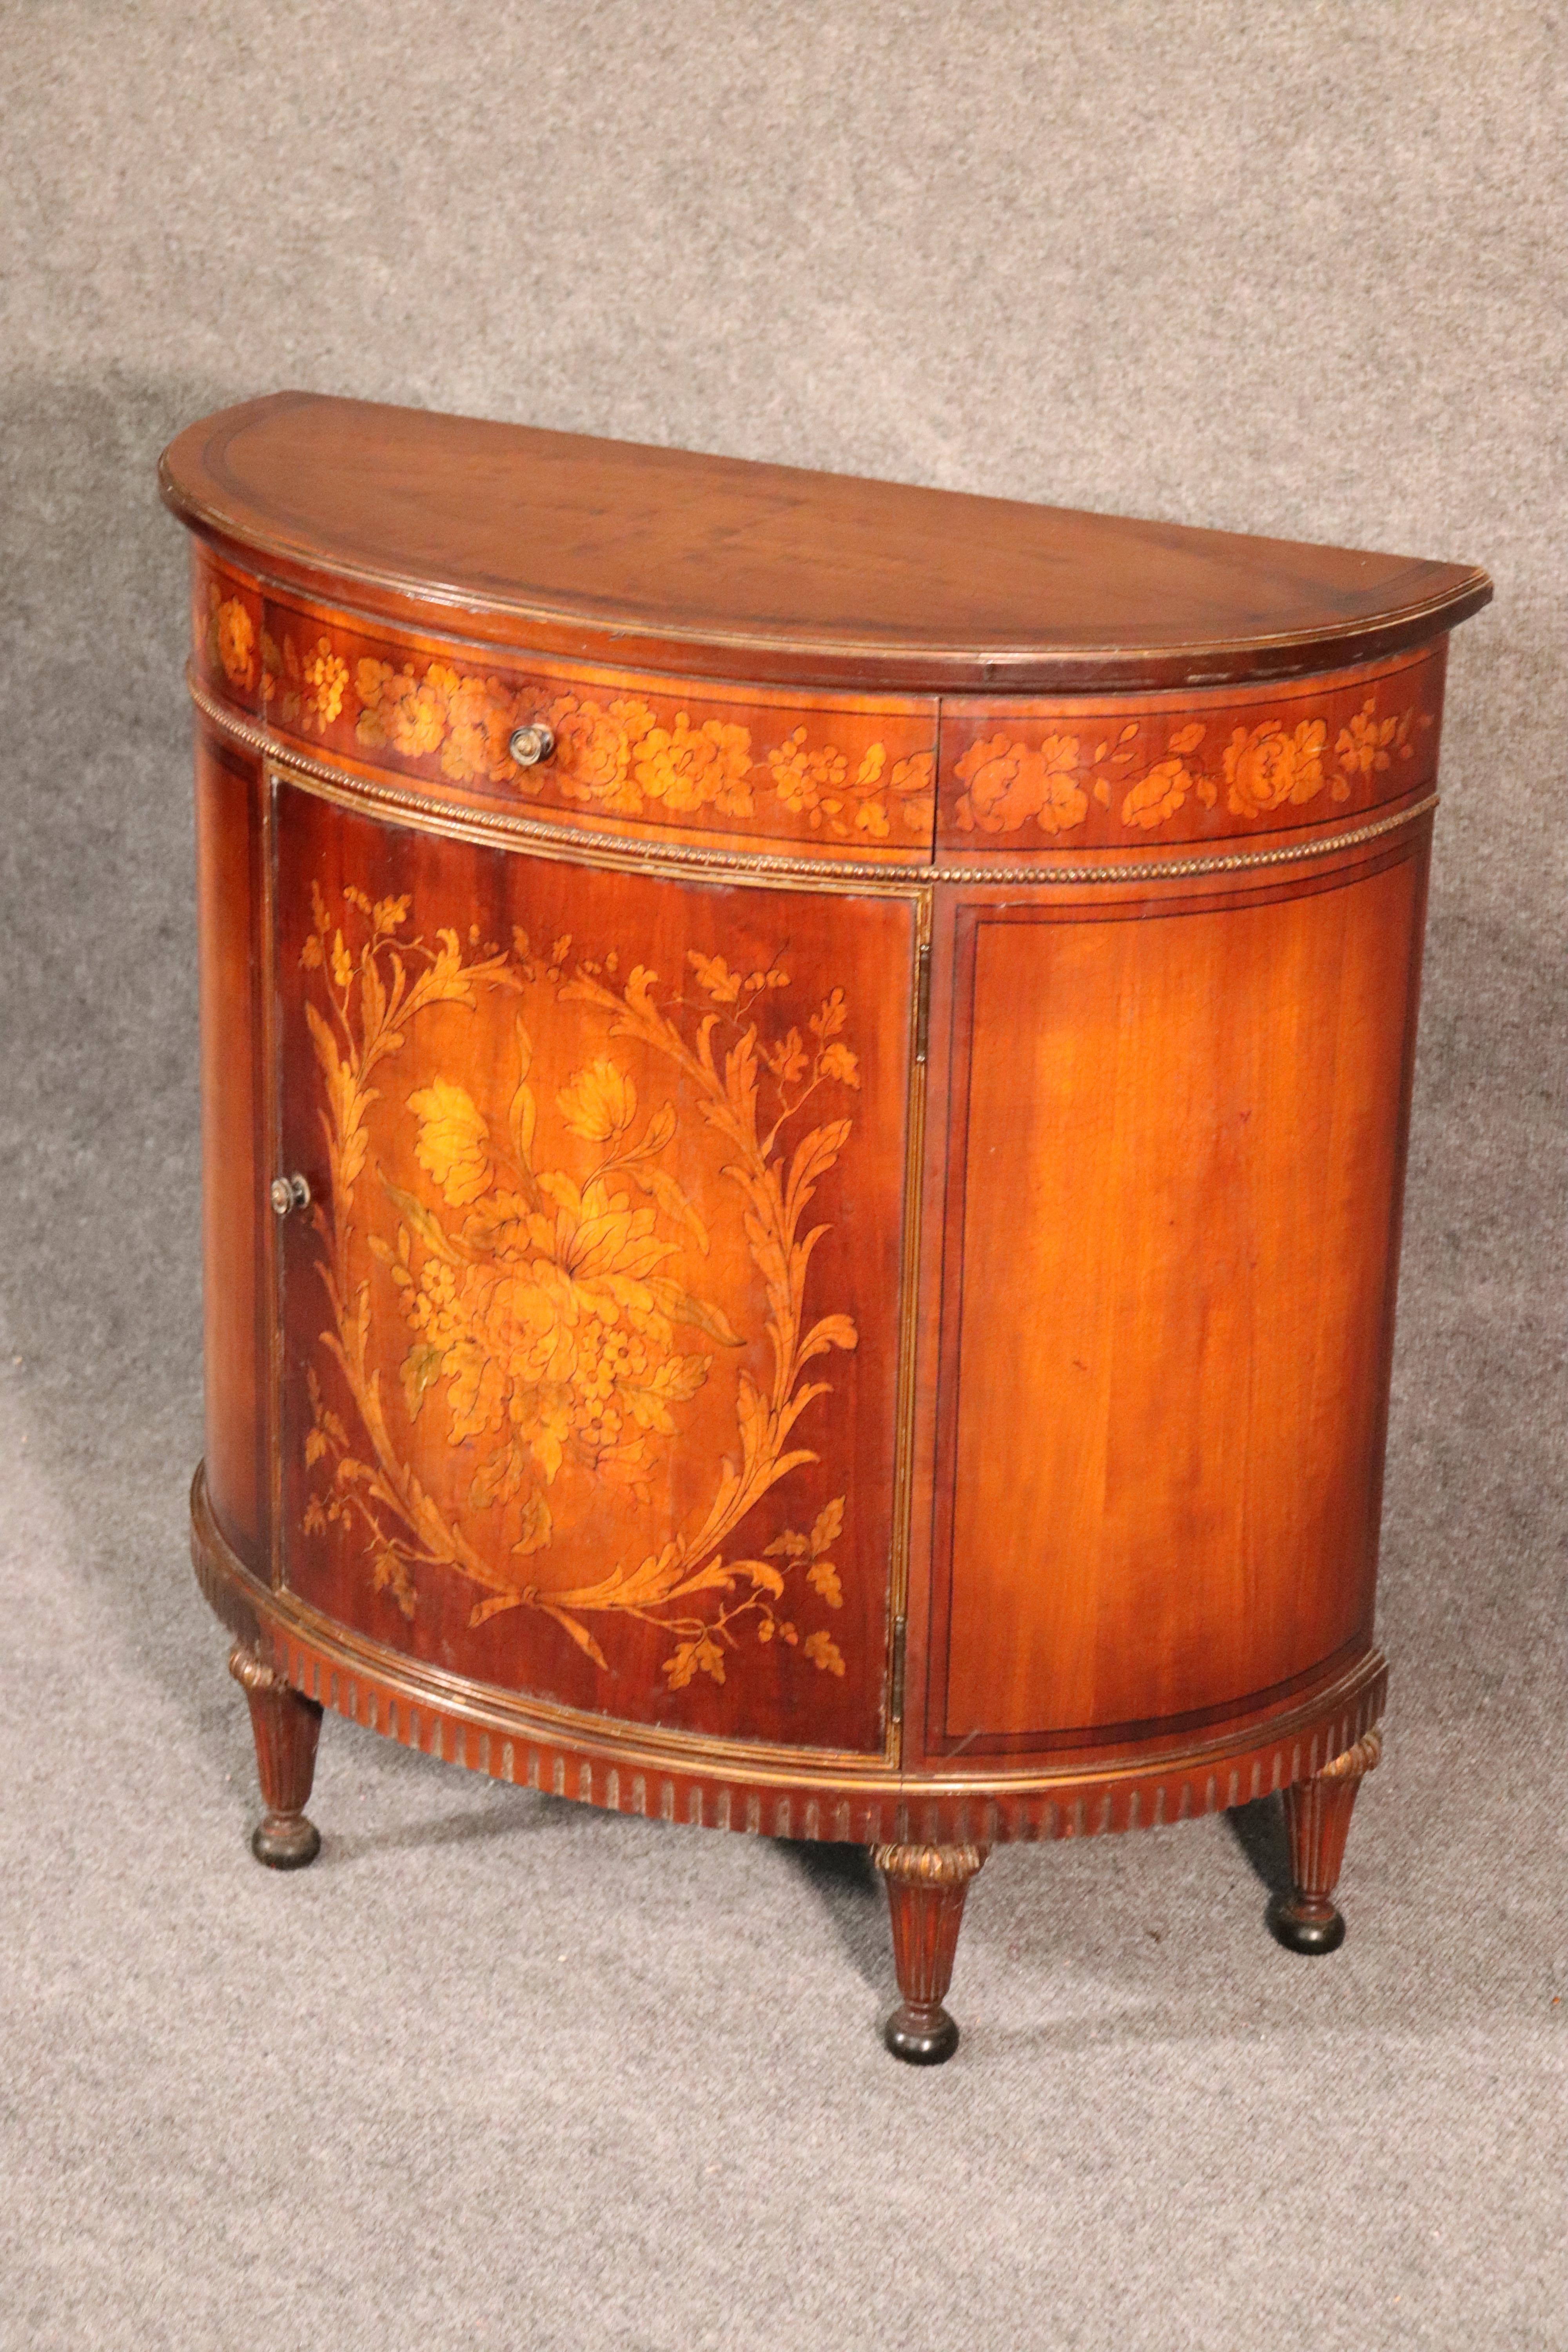 This is a superbly inlaid demilune Adams style commode made in Michigan during the 1920s. The commode is in pristine vintage condition with only the most minor signs of use and no damage. The cabinet measures 30 wide x 32 tall x 14 deep.